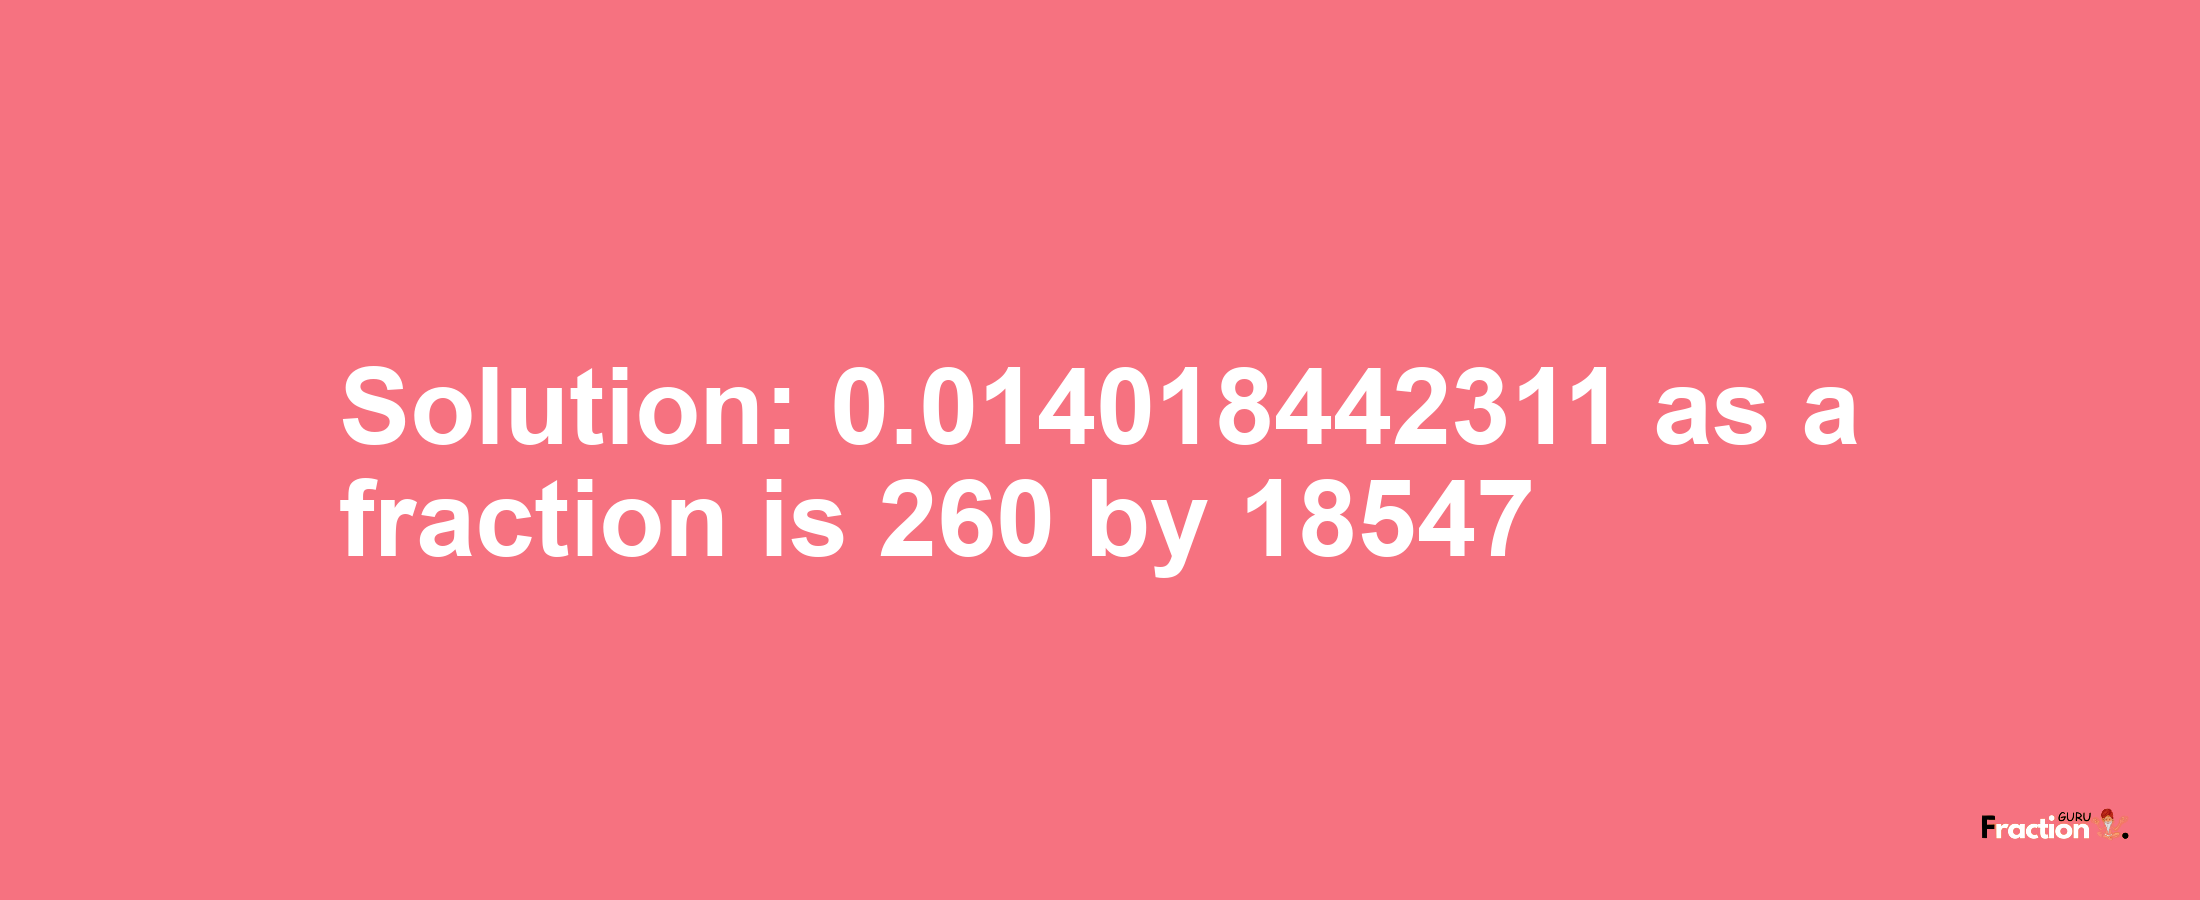 Solution:0.014018442311 as a fraction is 260/18547